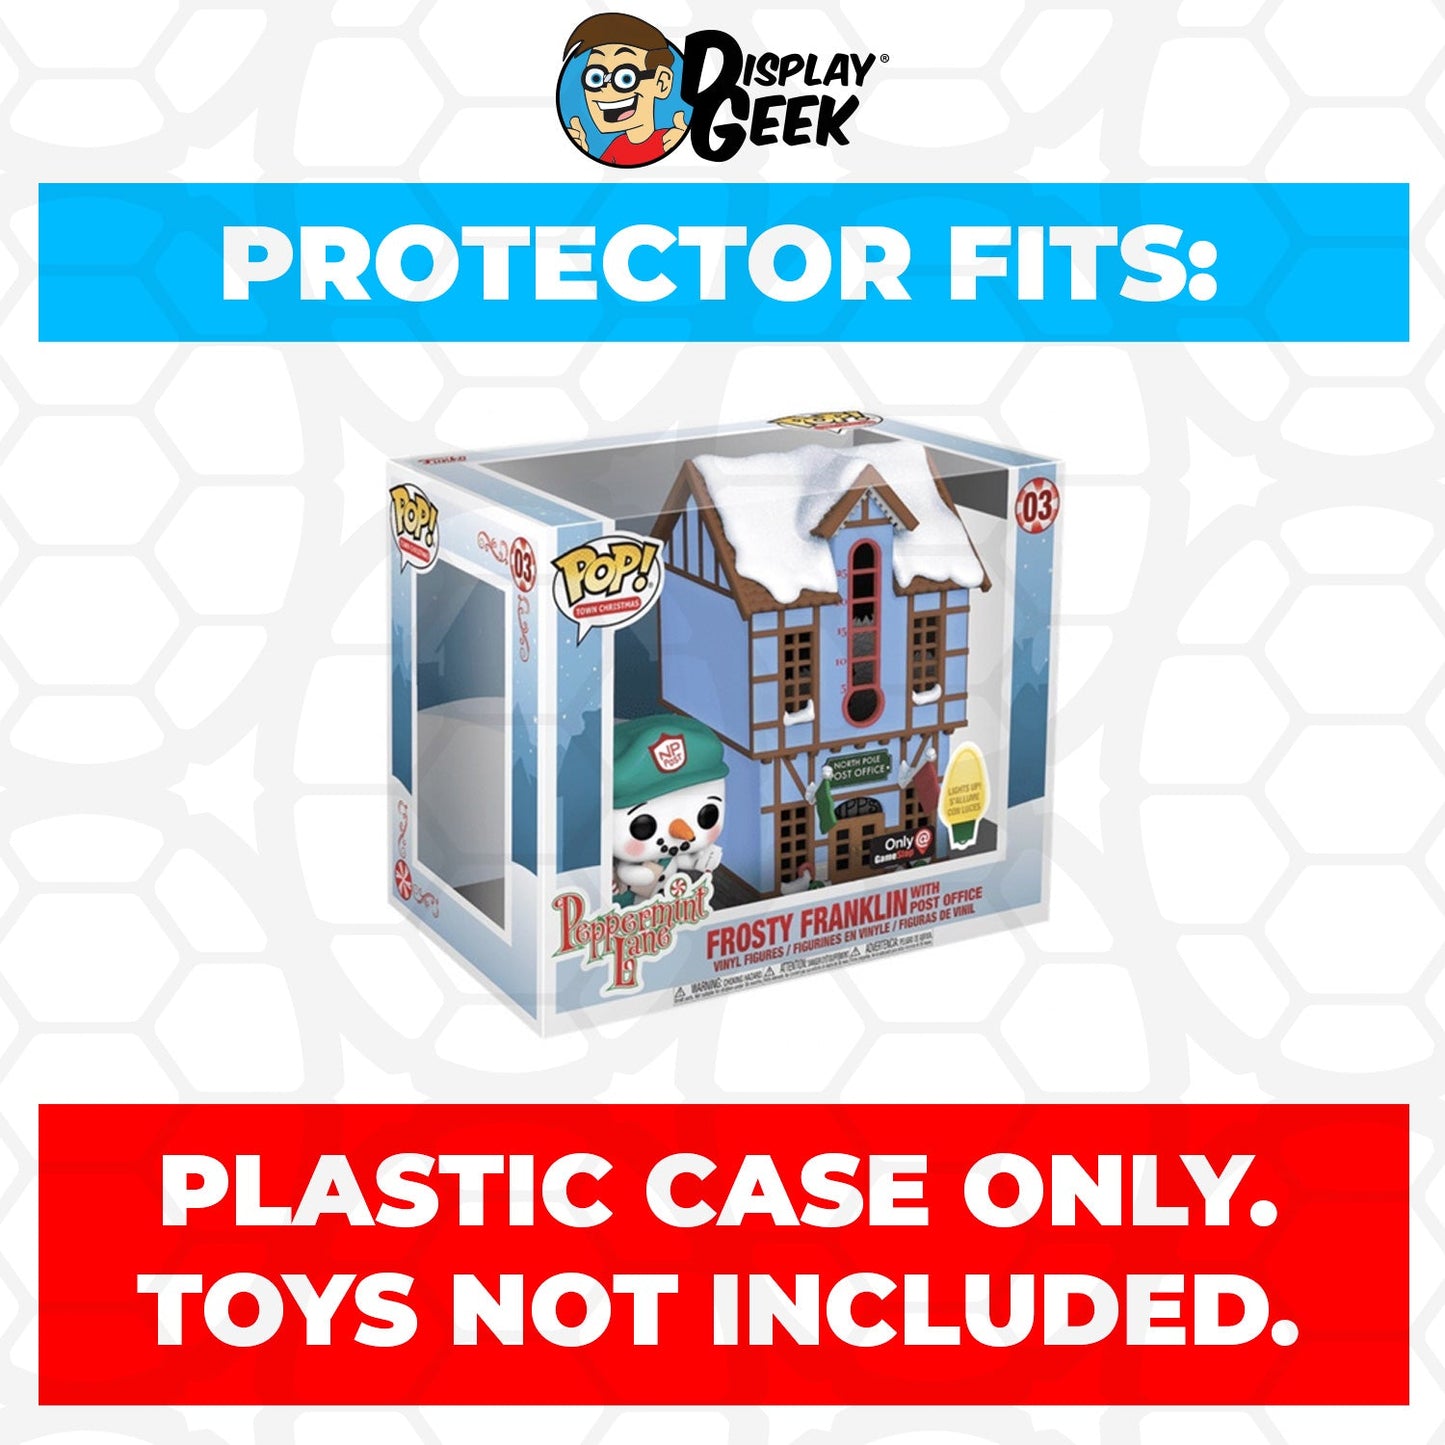 Pop Protector for Frosty Franklin with Post Office #03 Funko Pop Town - PPG Pop Protector Guide Search Created by Display Geek